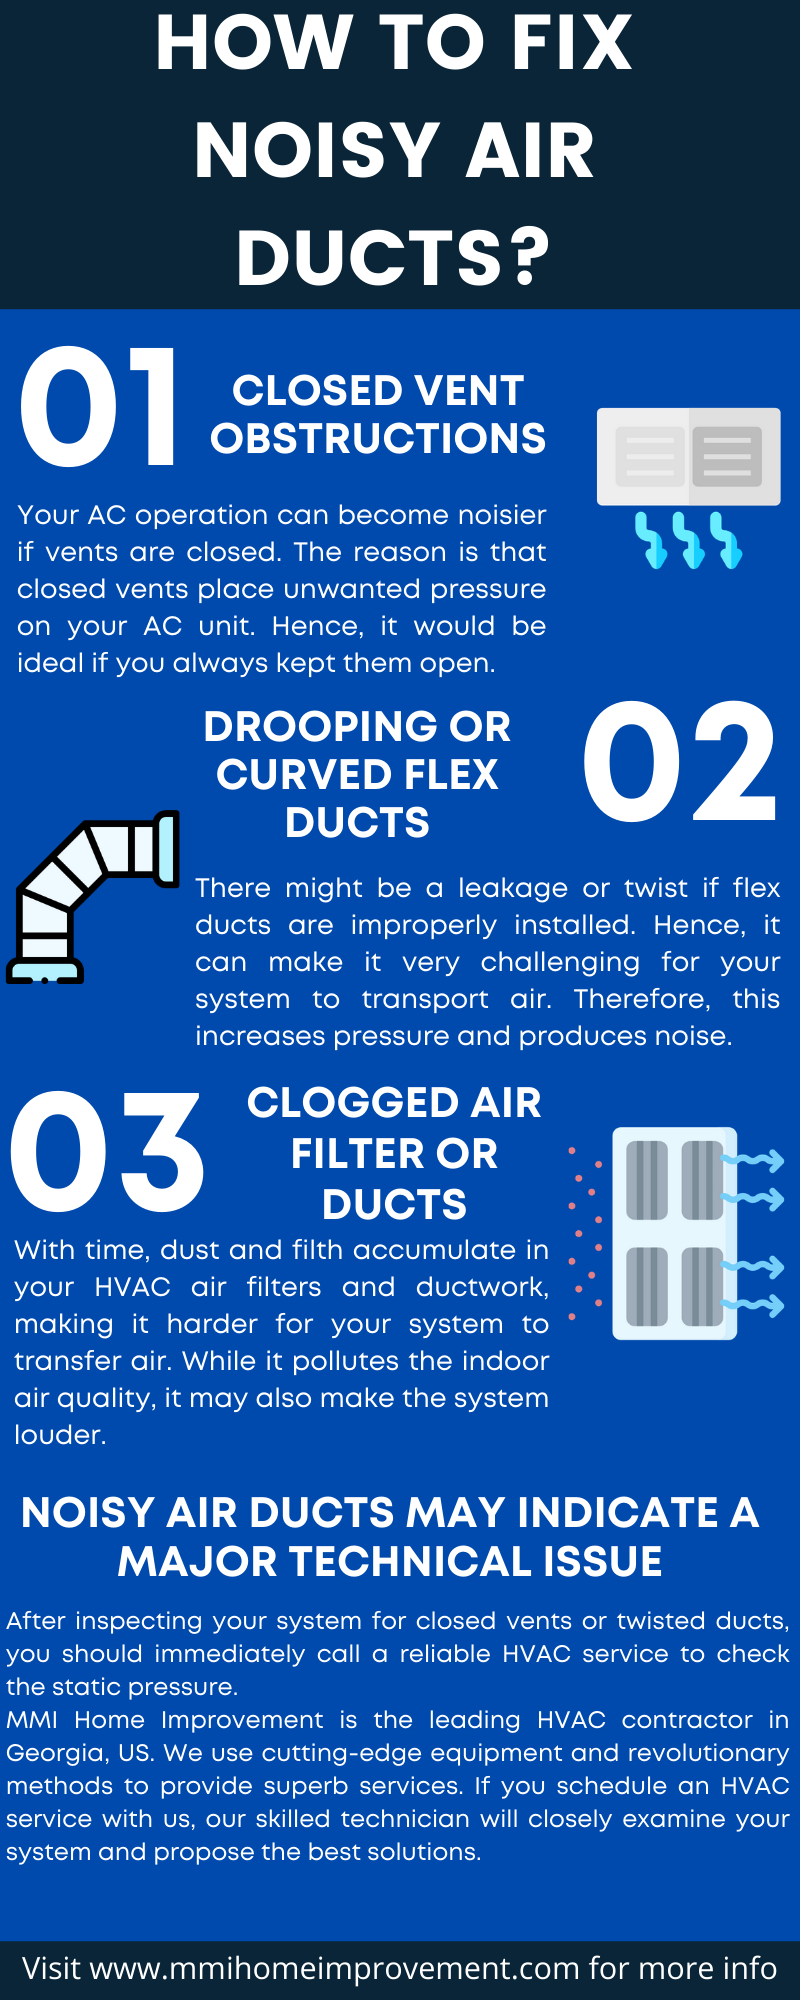 How To Fix Noisy Air Ducts